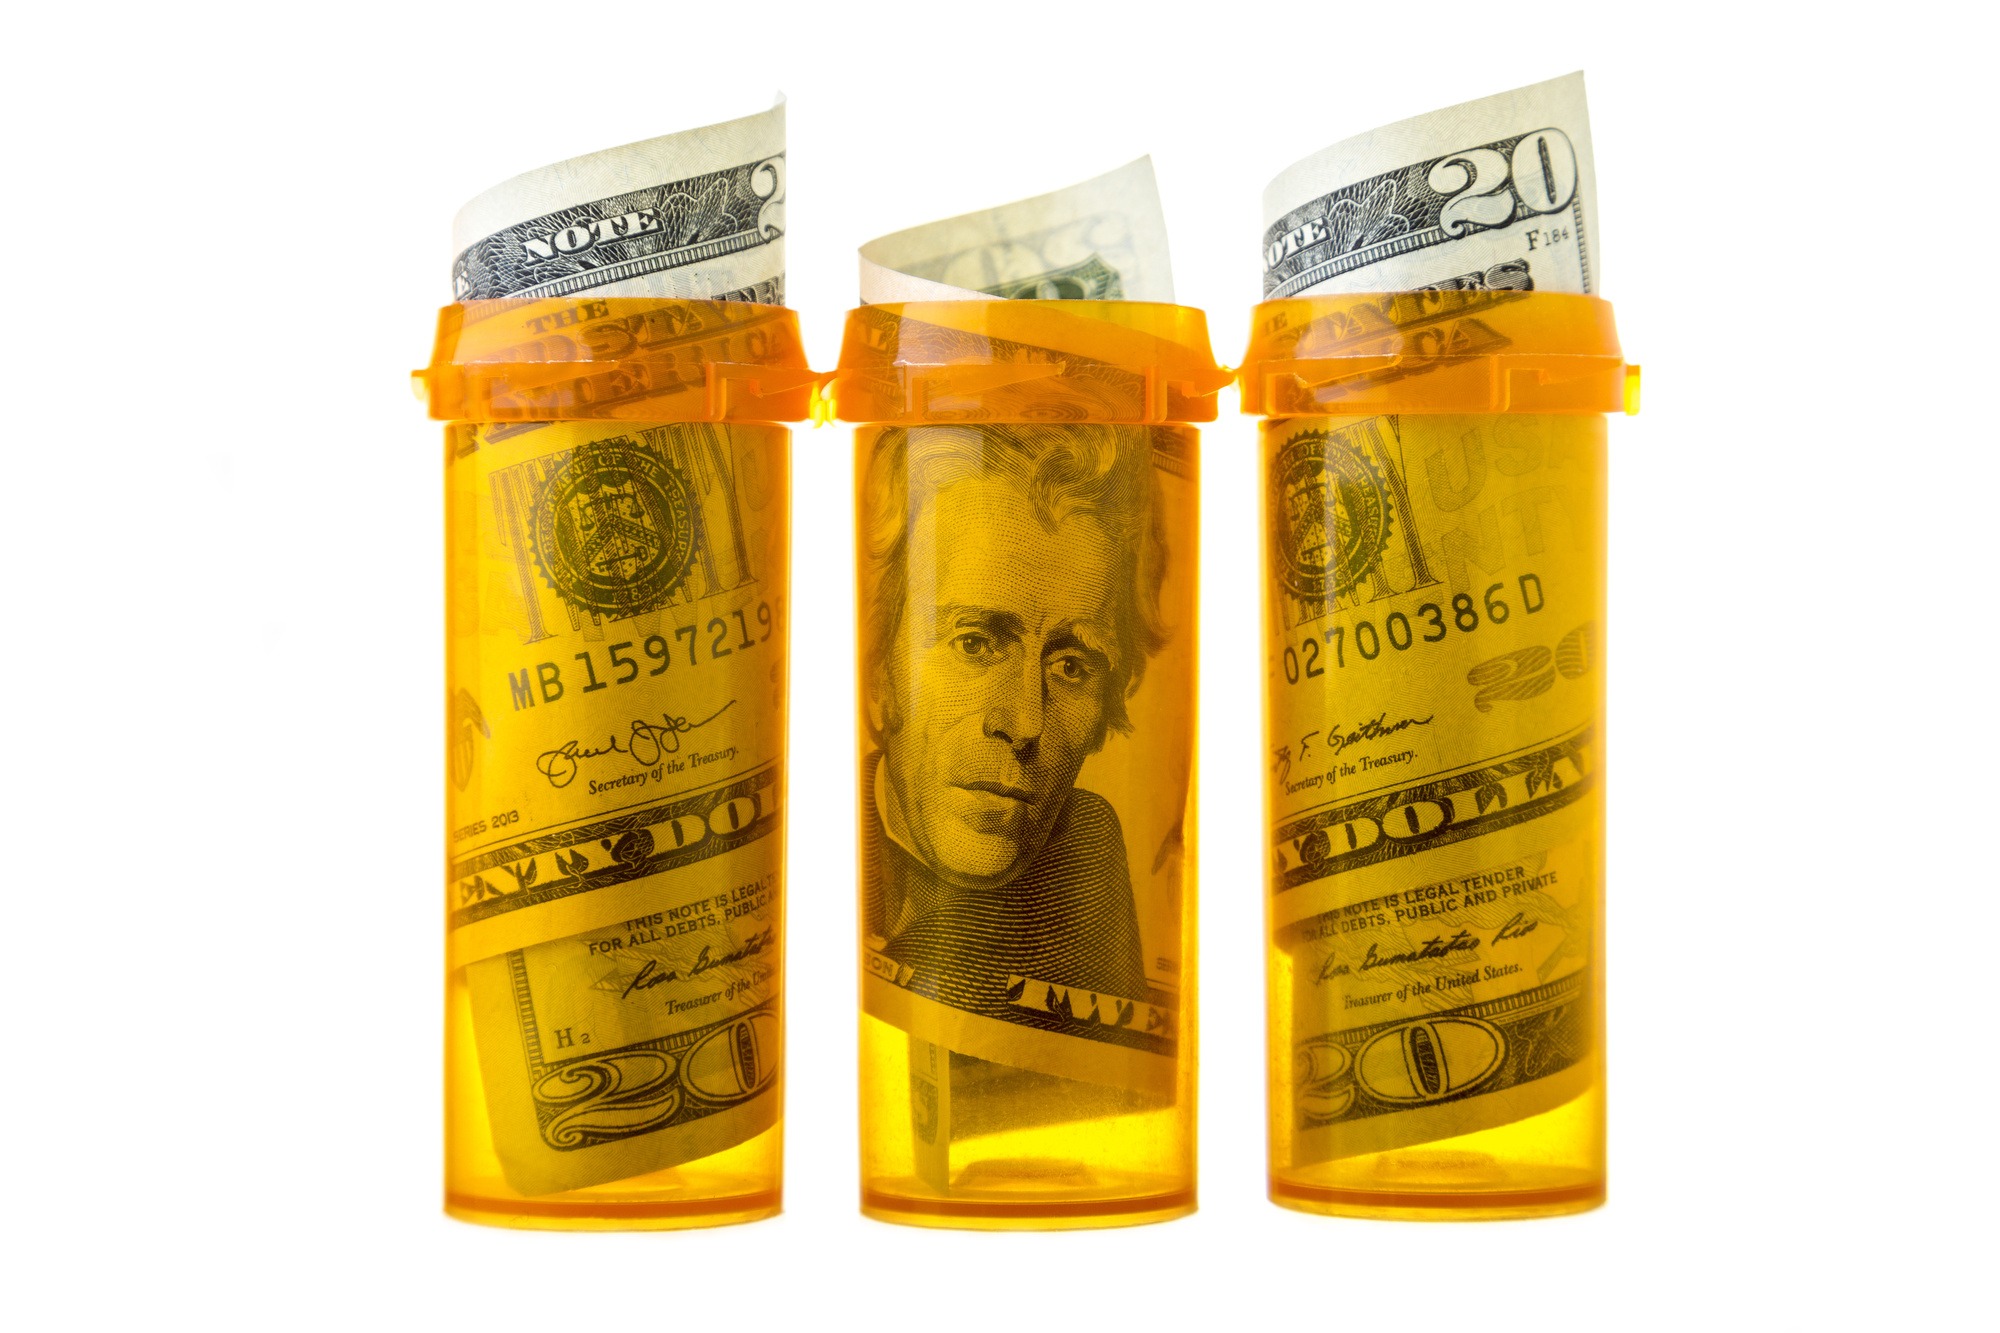 Save Money on Prescriptions With These 5 Tips